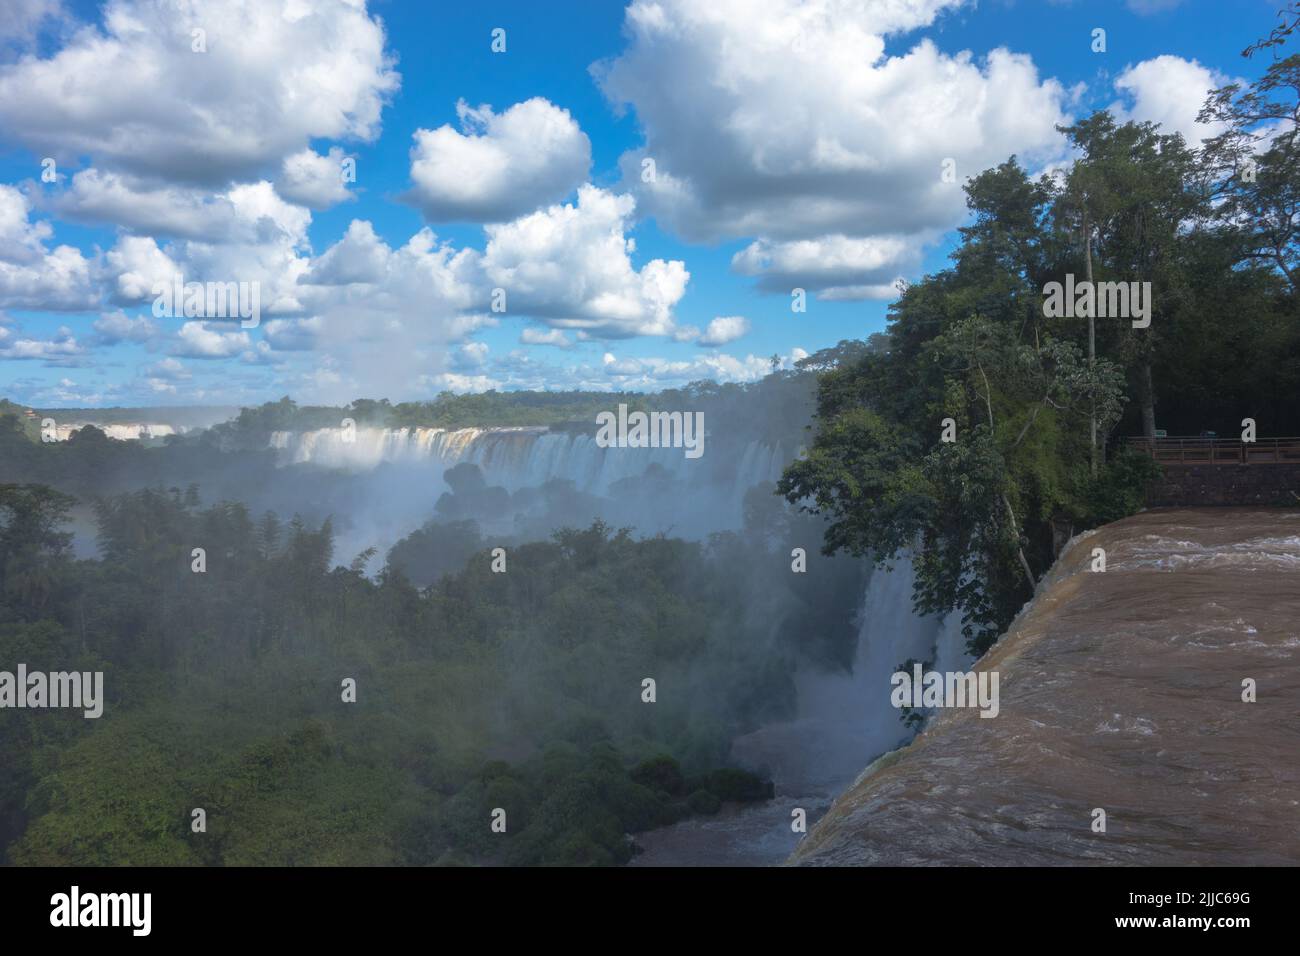 Huge beautiful panorama view from Iguazu Fall, Catarata Argentine Side blue sky green forest murky waters of Iguazu river strong current. Stock Photo